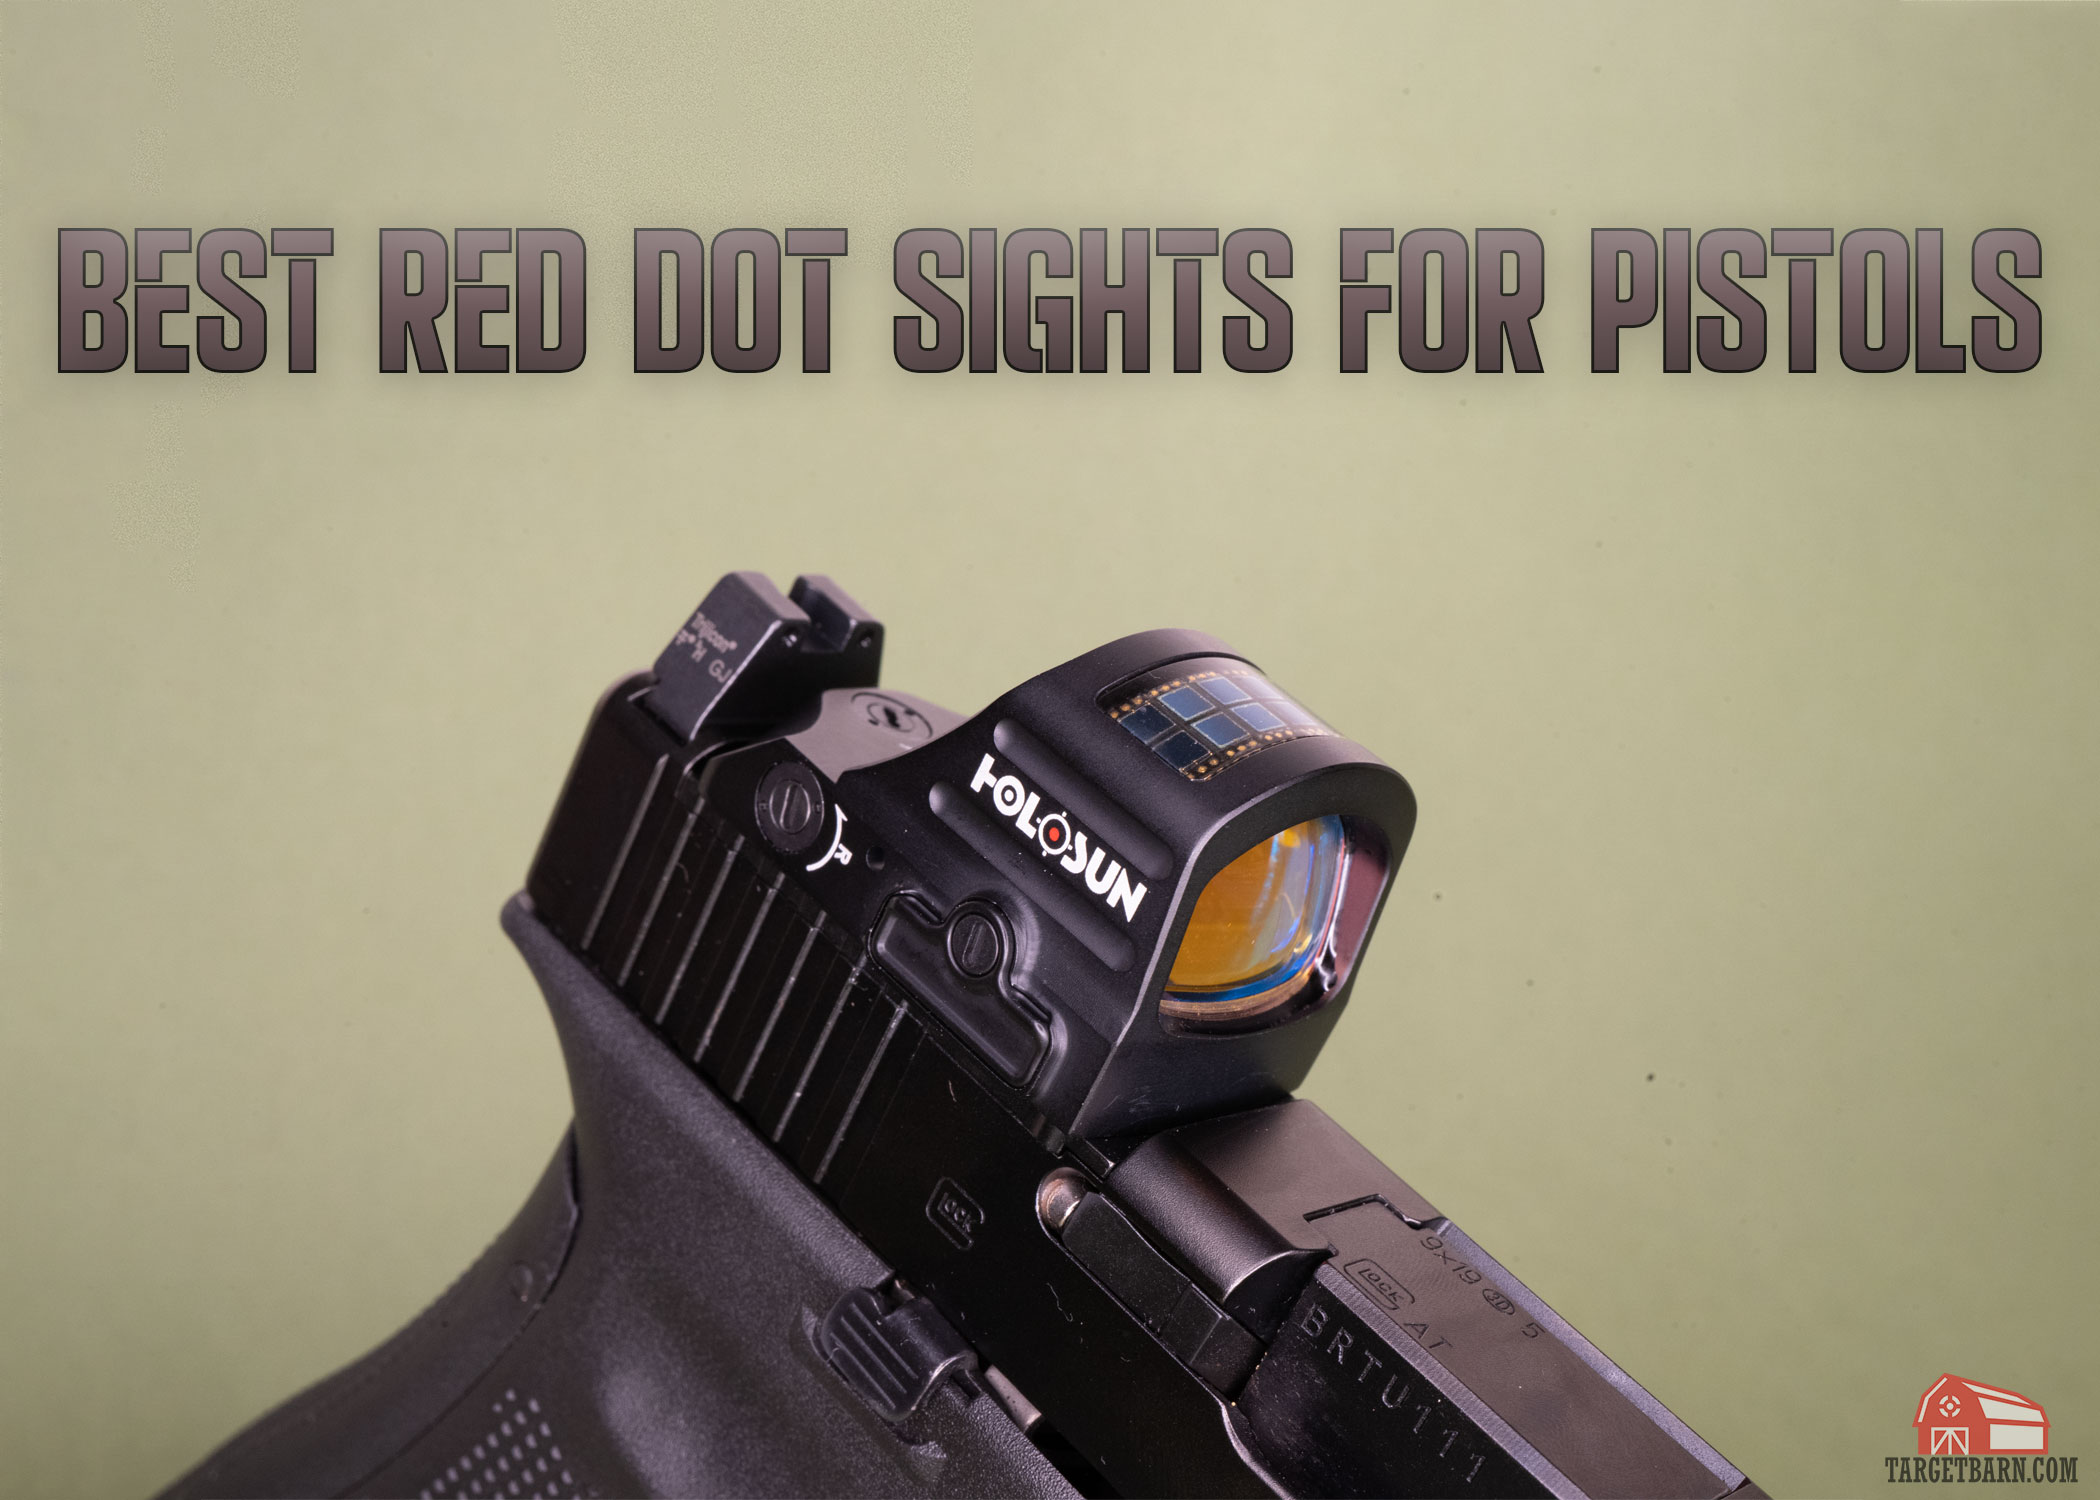 Best Pistol Red Dot Sights Top Picks For Self Defense And Competition